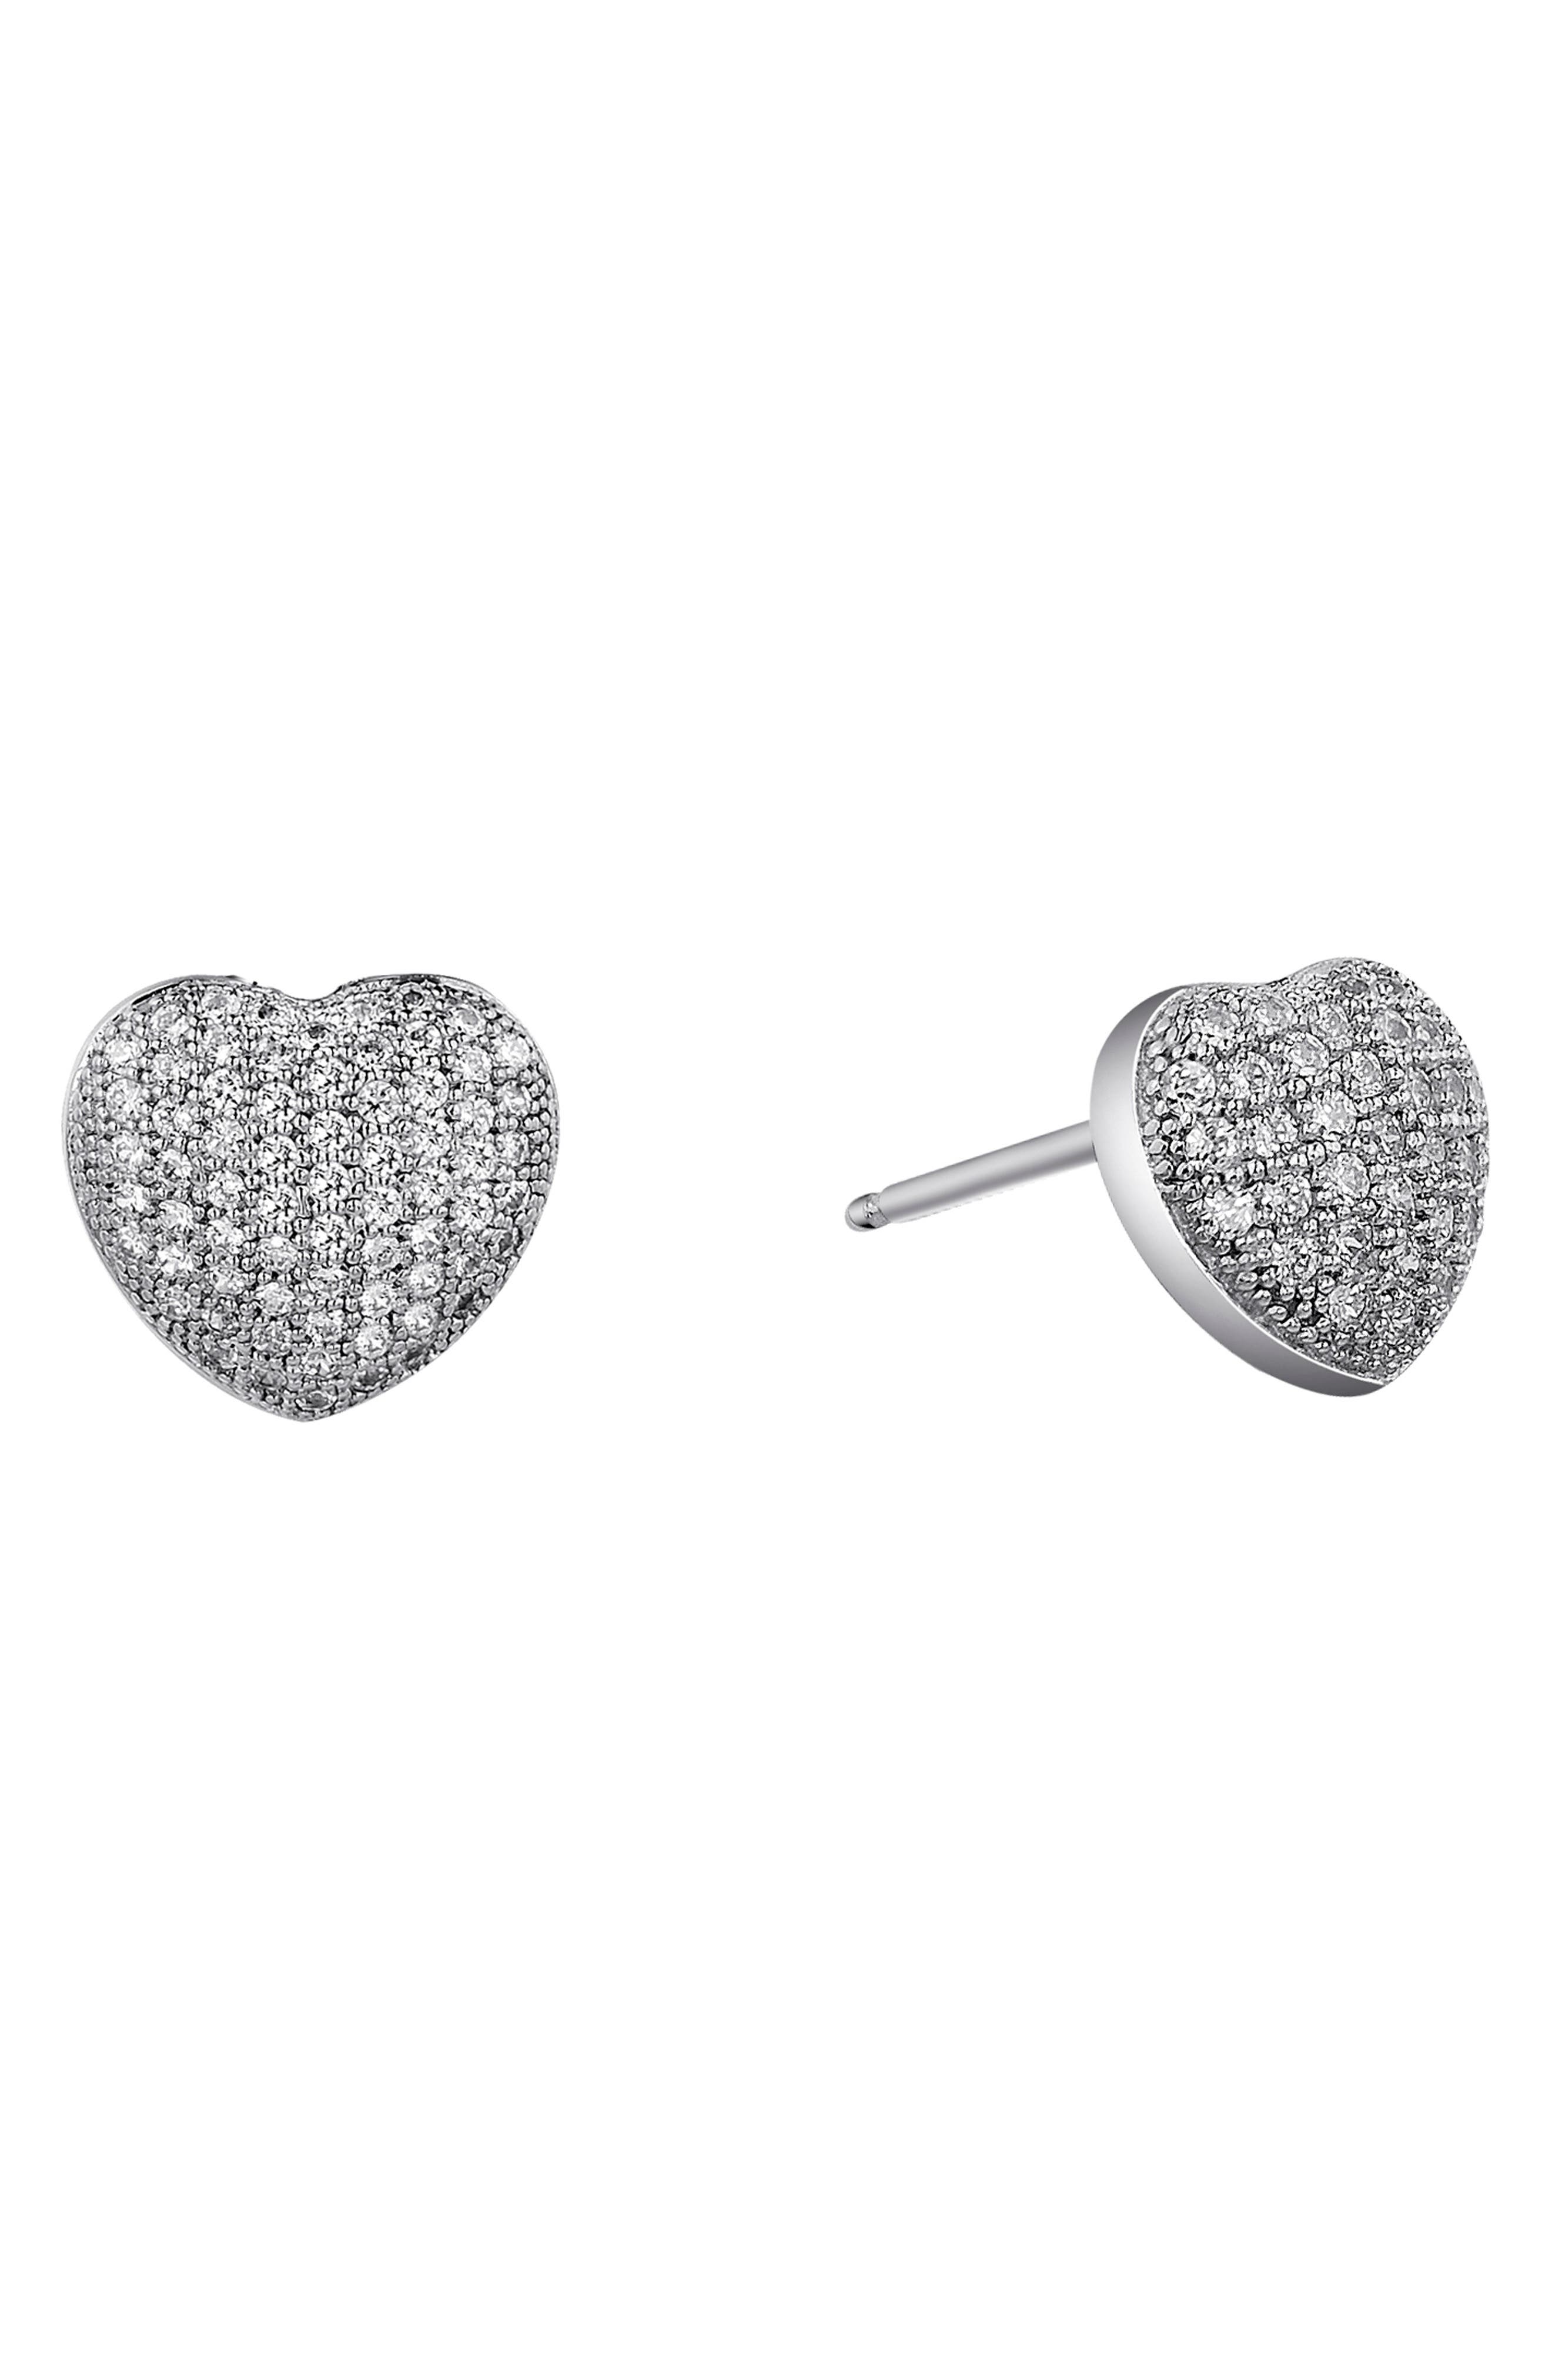 Lafonn Platinum Bonded Sterling Silver Micro Pave Heart Stud Earrings In White